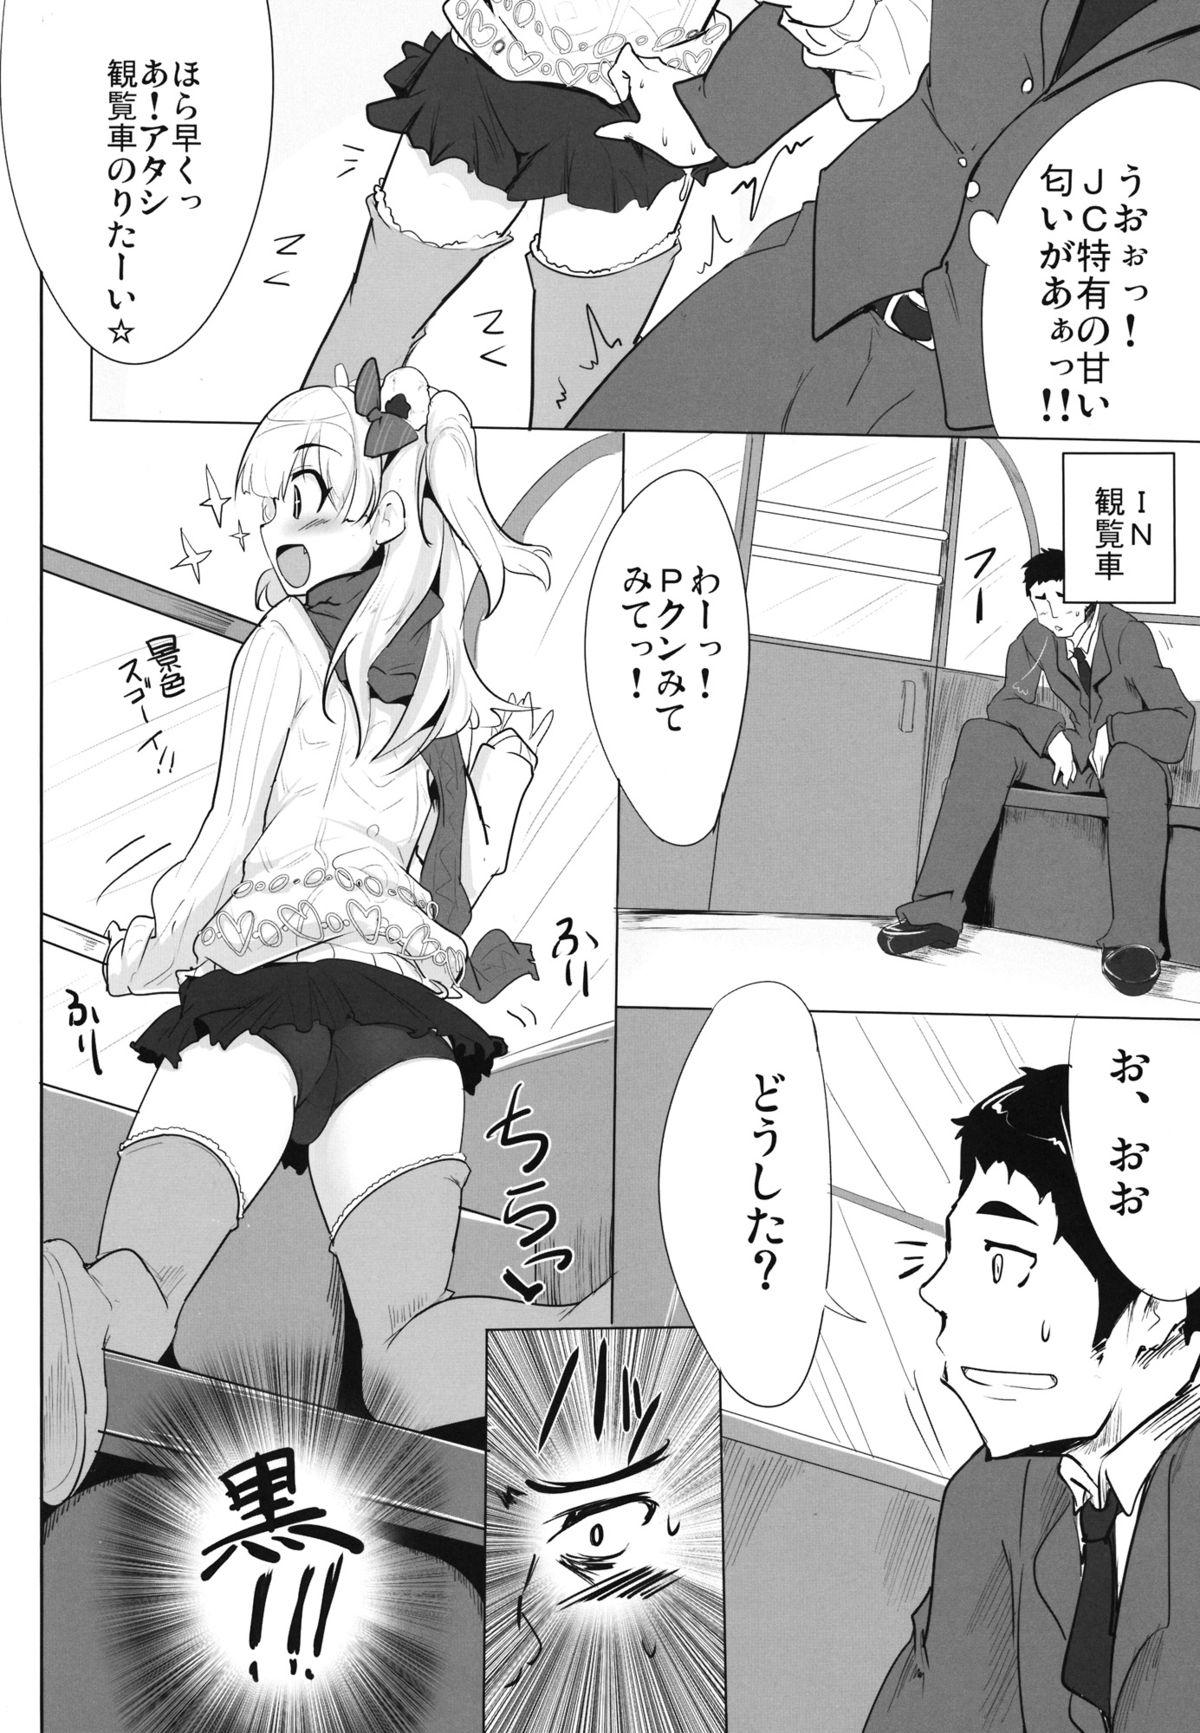 Spooning Imouto no Hon - The idolmaster Old Man - Page 11